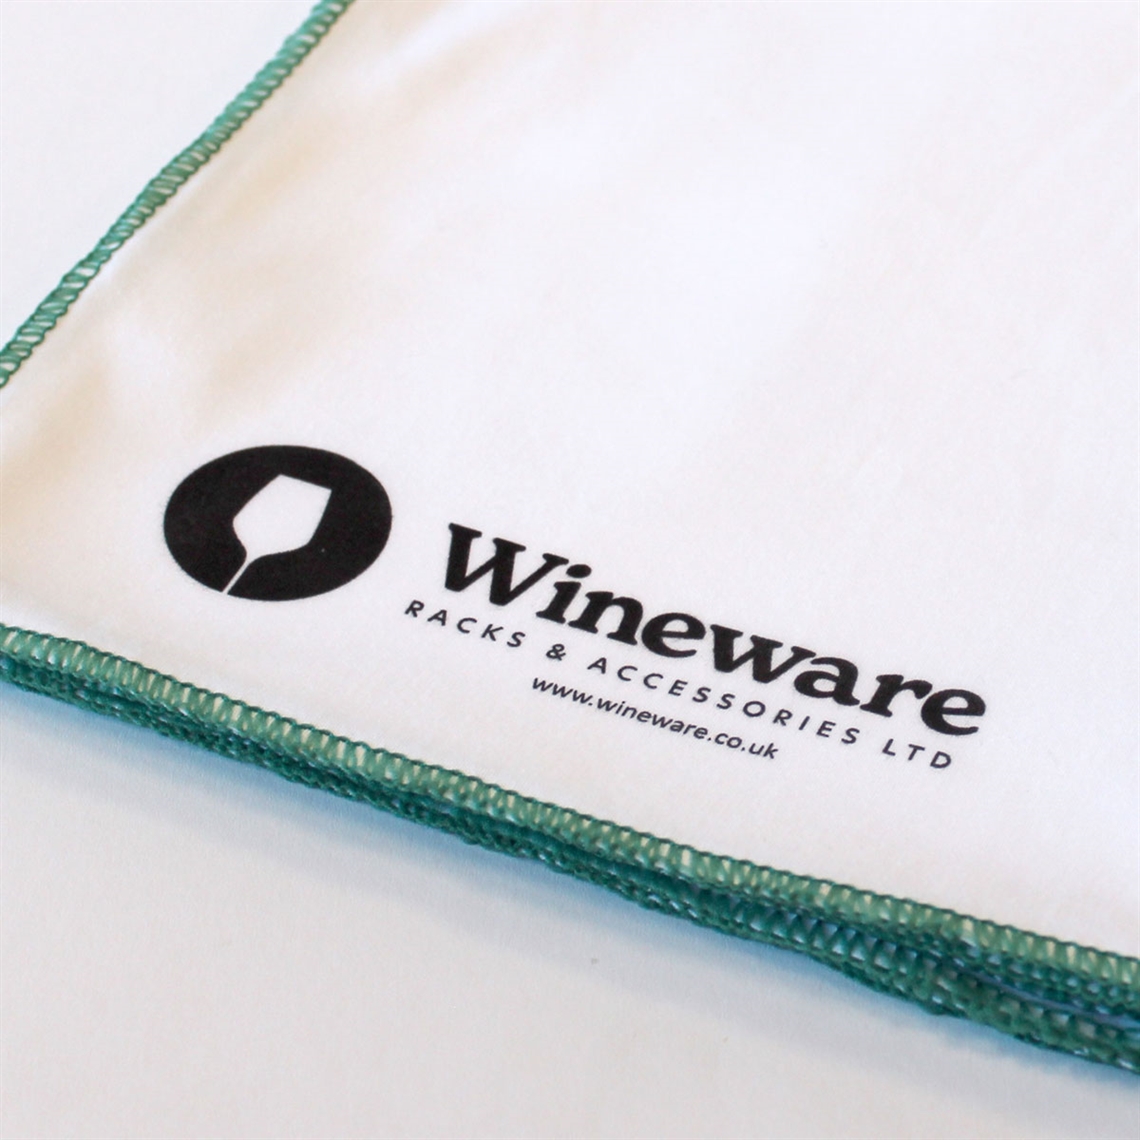 View more wine spittoons from our Wine Decanter Cleaning range